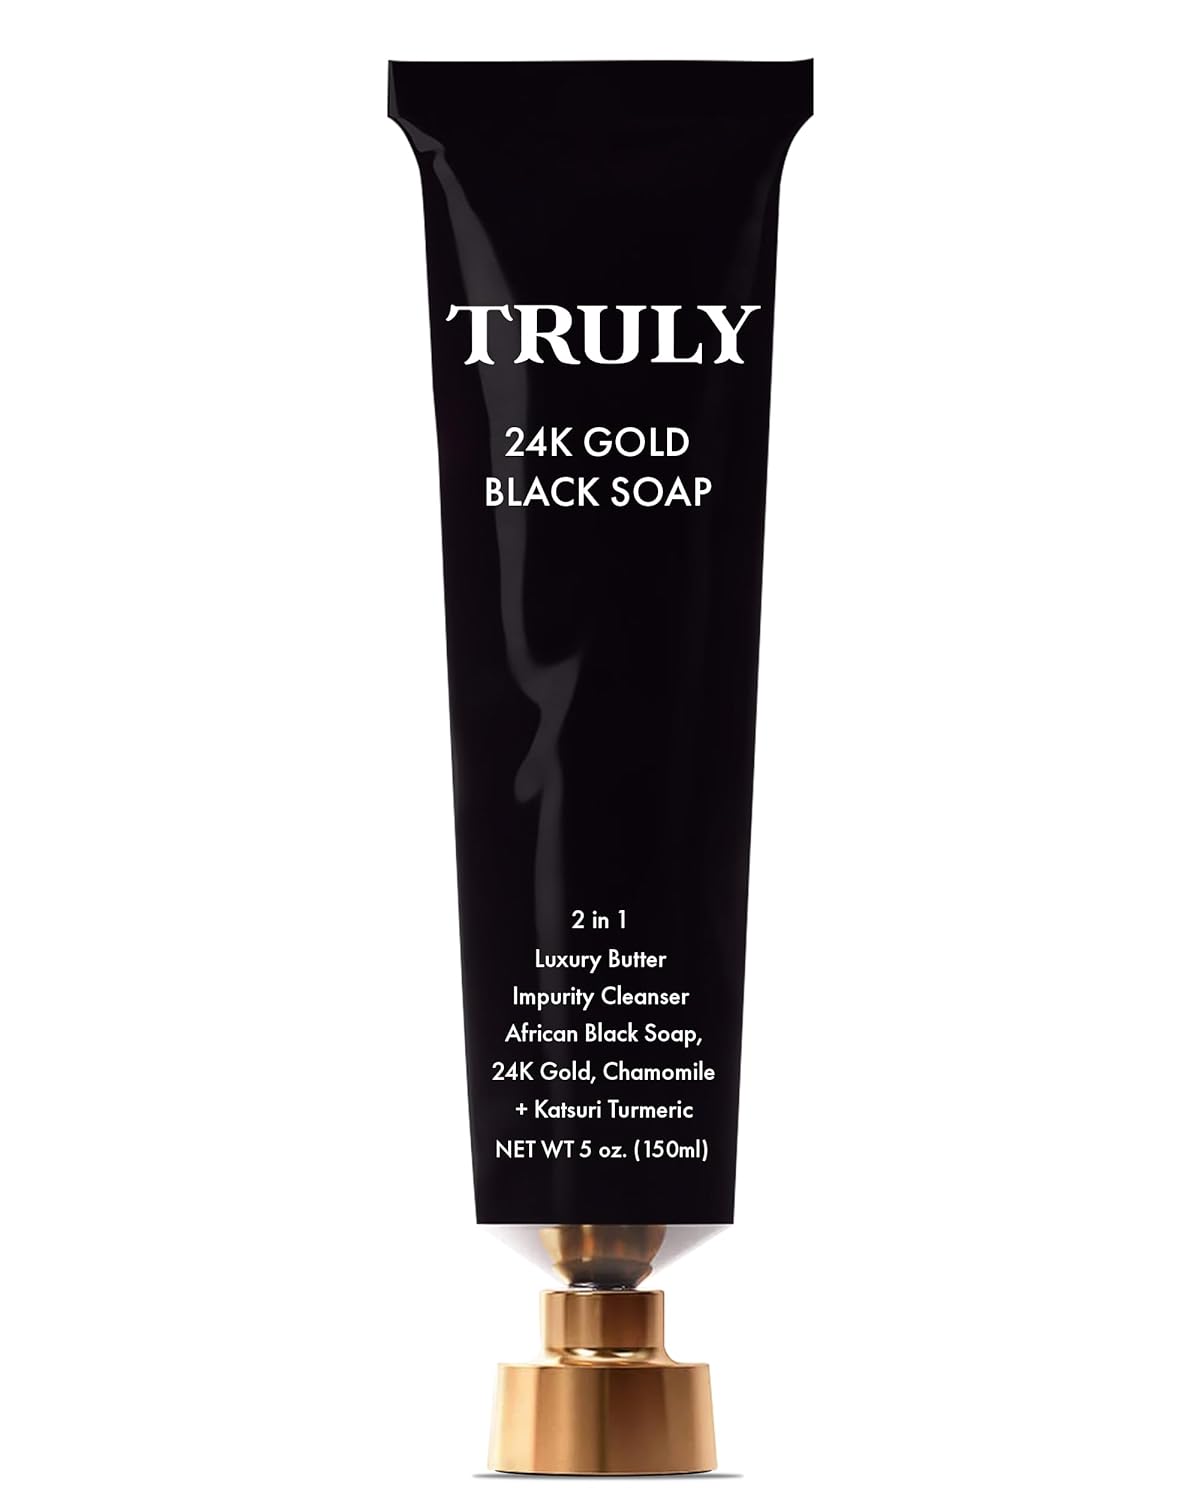 Truly Beauty 24K Gold Black Soap Review